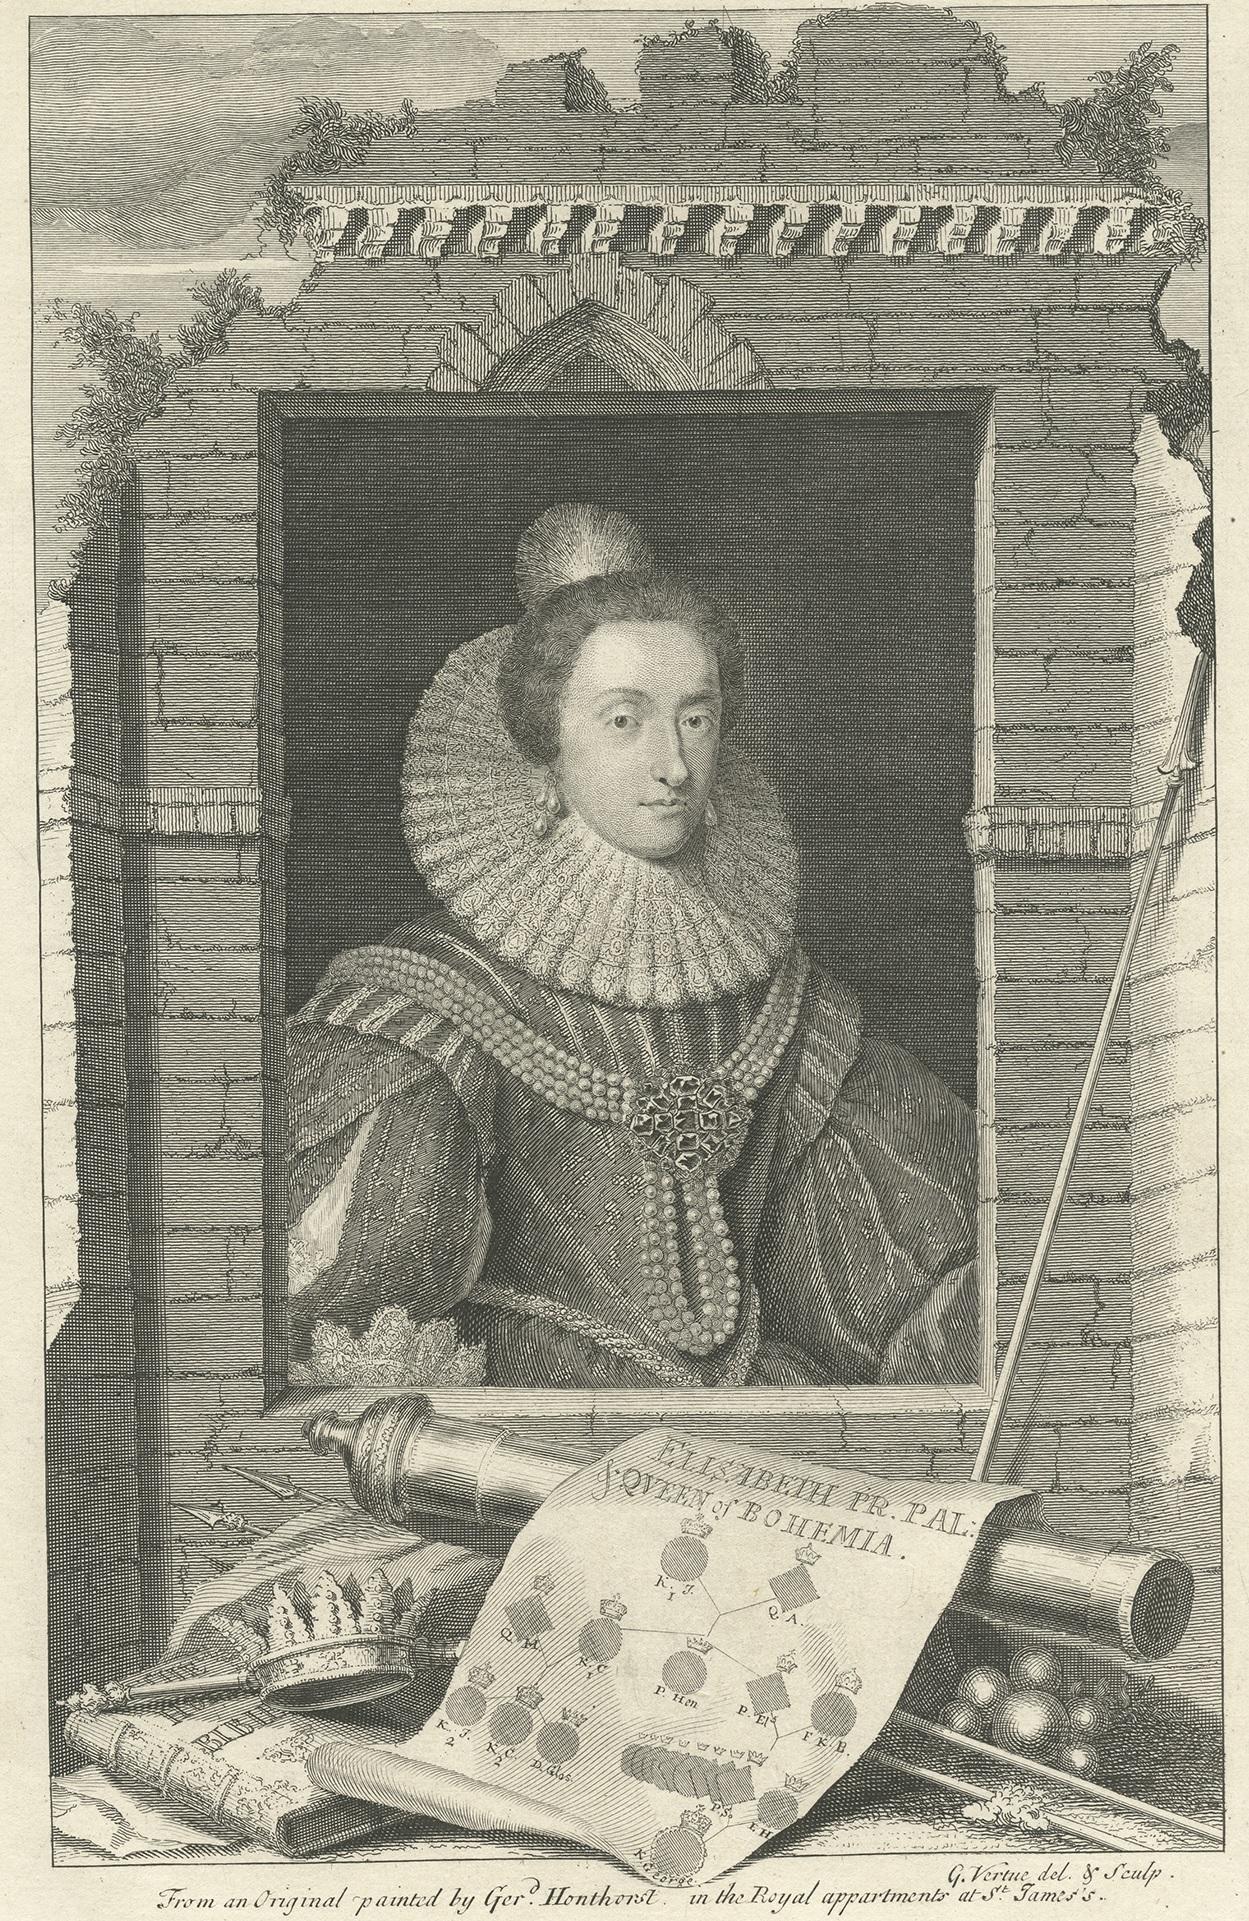 Antique print titled 'Elisabeth Pr. Pal: Queen of Bohemia'. Elizabeth, Queen of Bohemia, 1596-1662. Daughter of James VI and I. Engraved by G. Vertue.